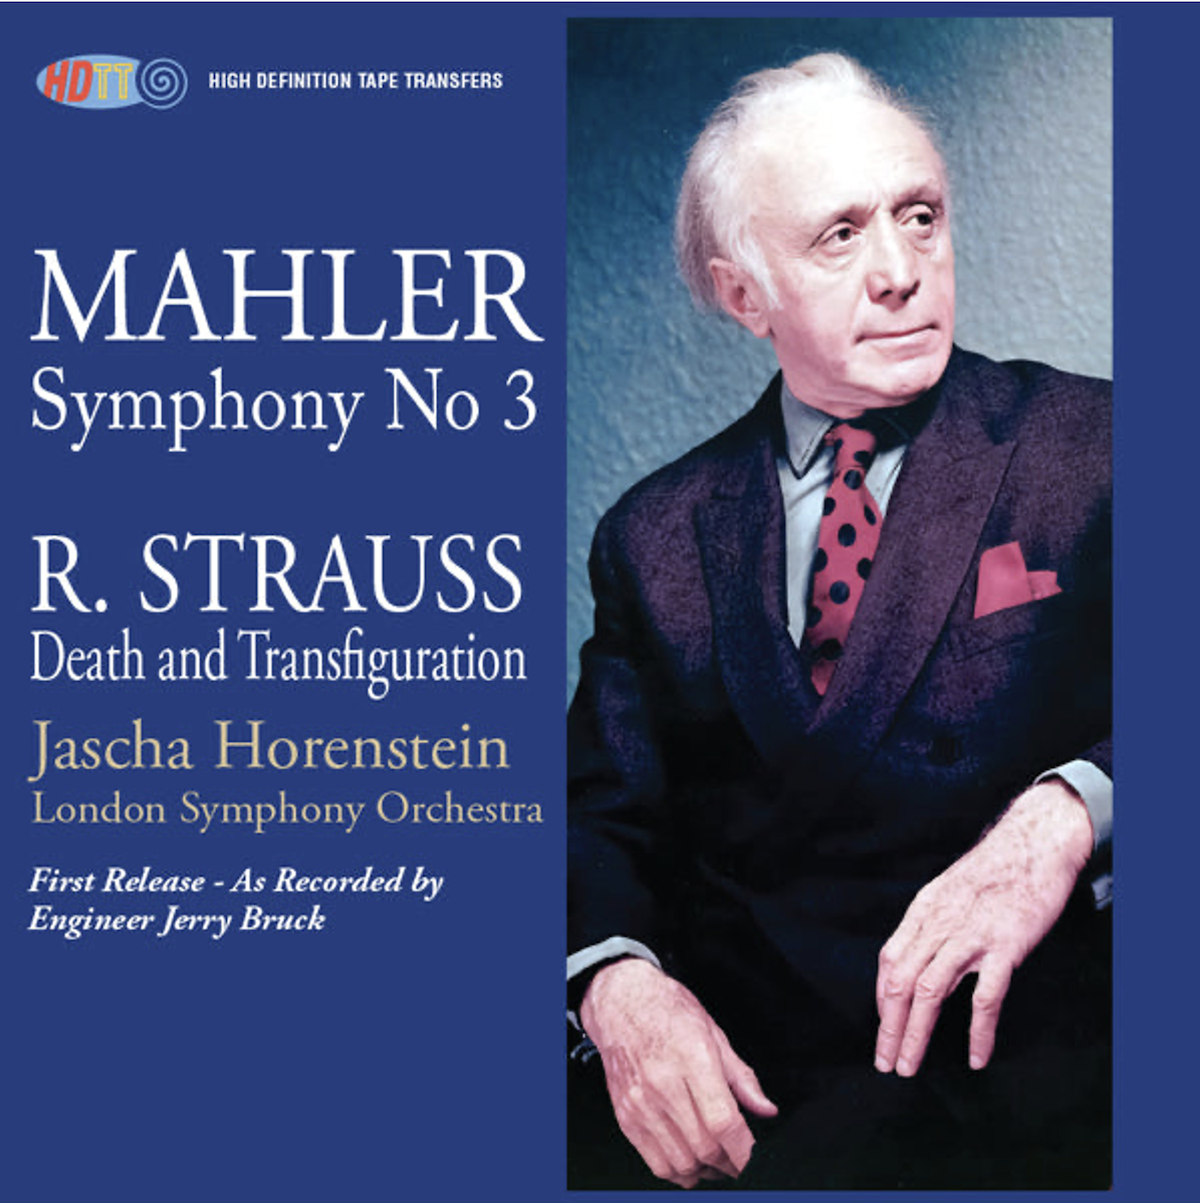 Mahler Symphony No 3 as recorded by Engineer Jerry Bruck